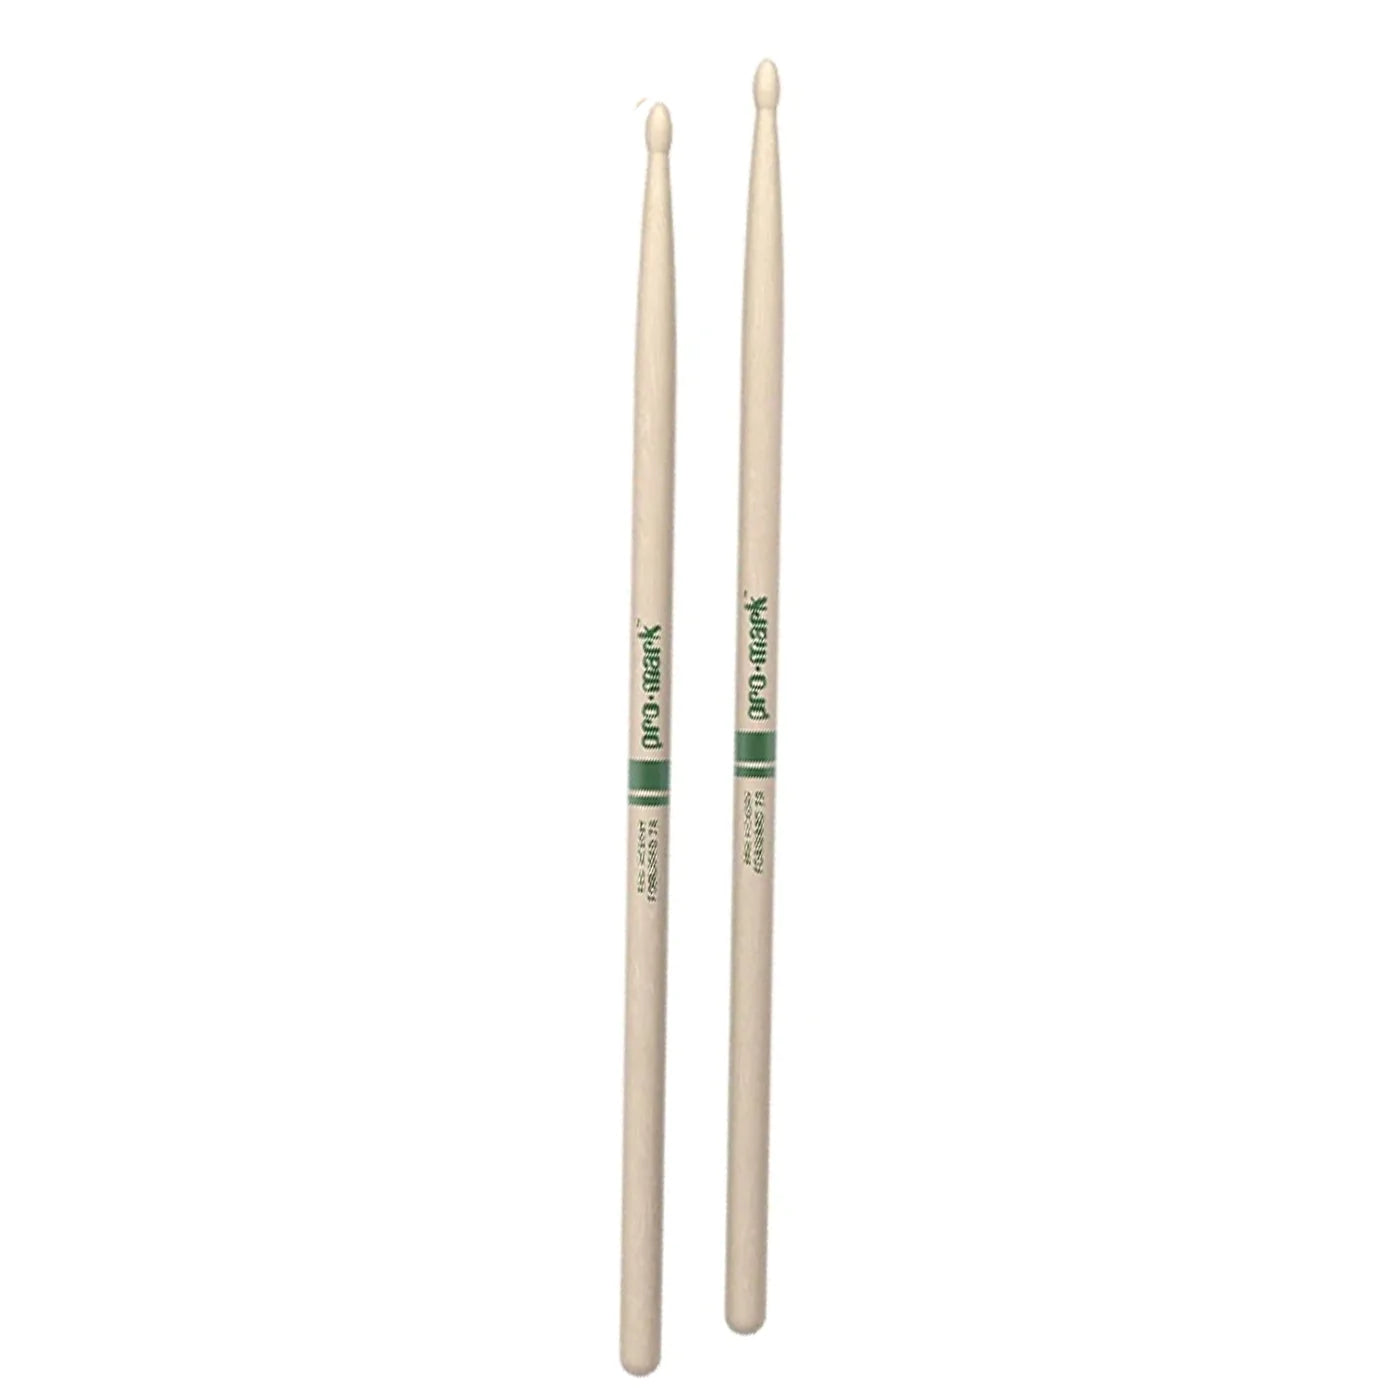 Promark 'The Natural' Hickory Wood Drumsticks